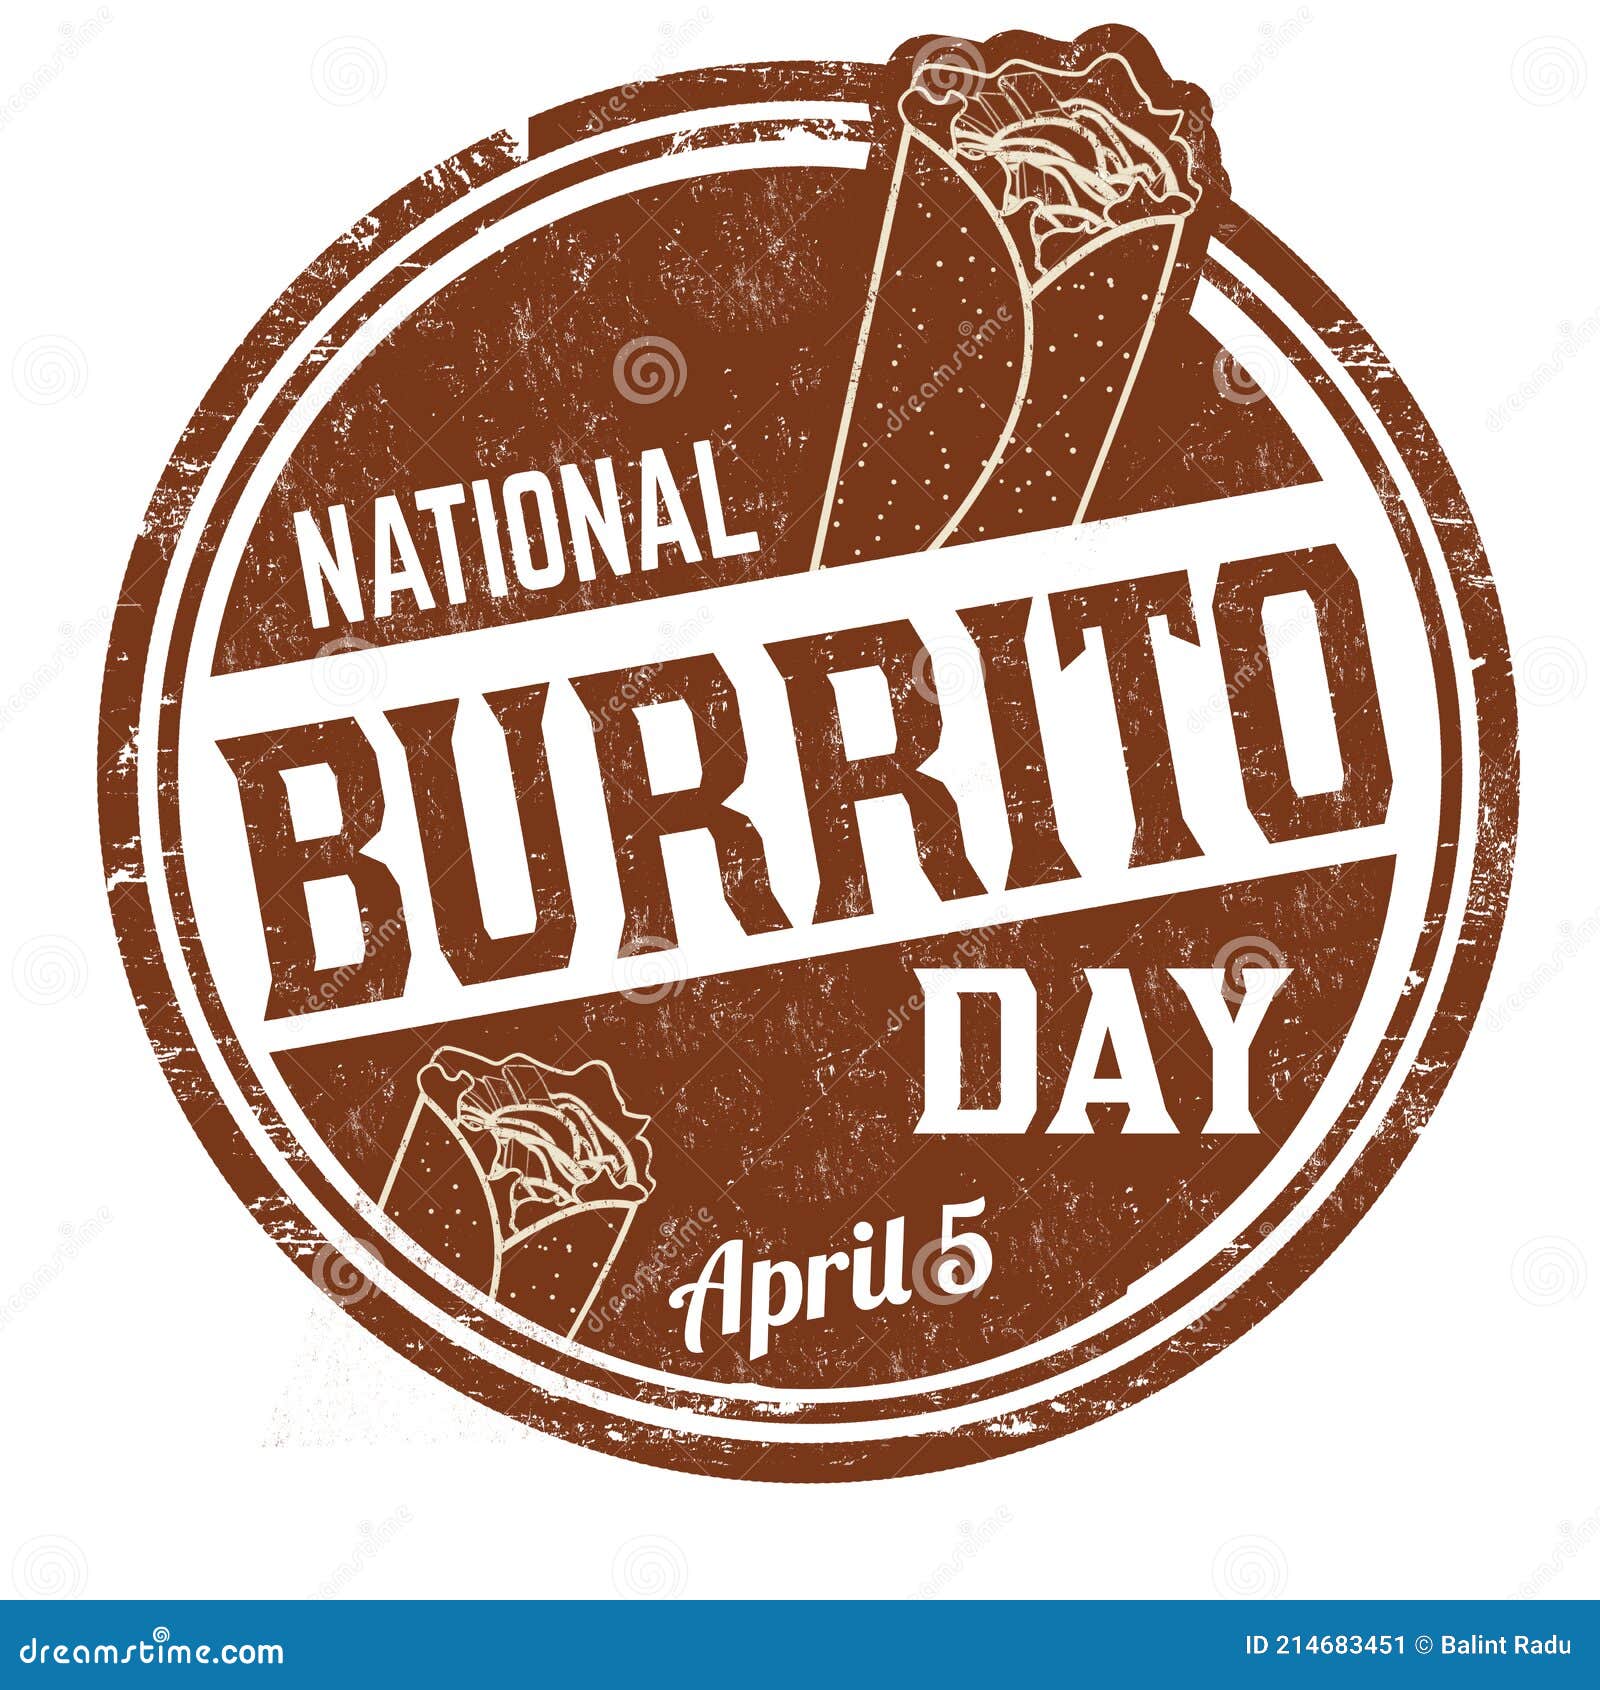 National Burrito Day Grunge Rubber Stamp Stock Vector Illustration of